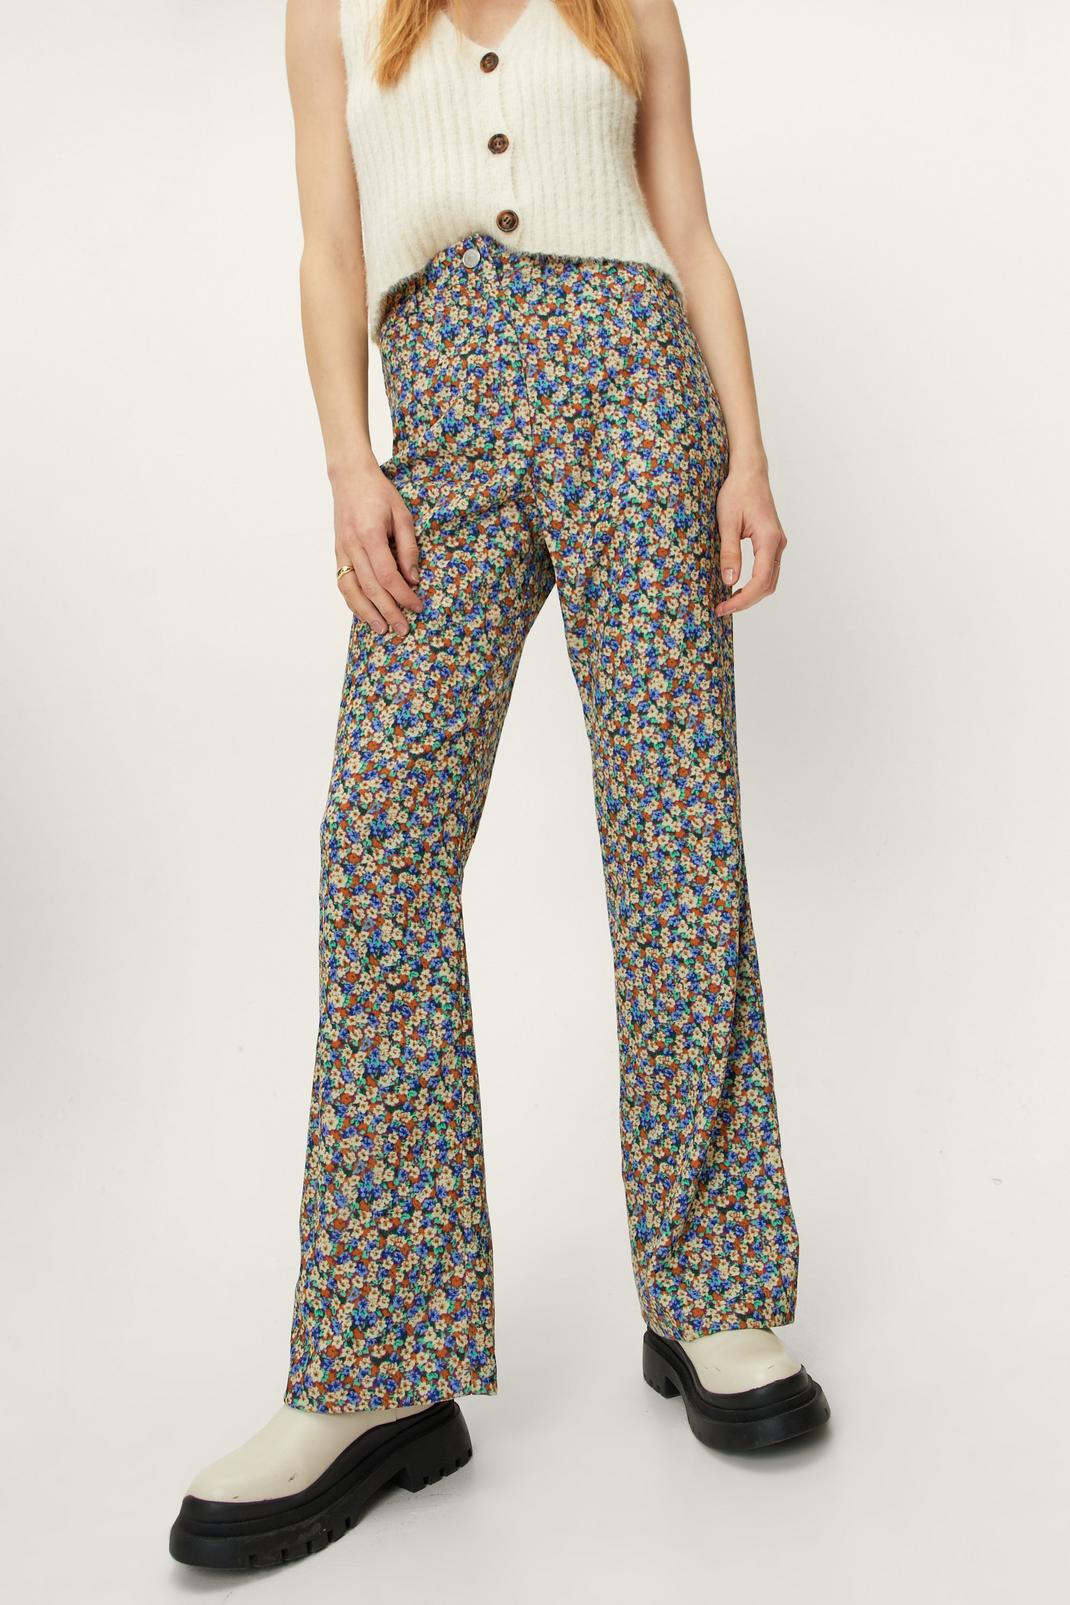 Rose Twill High Waisted Floral Print Flared Pants image number 1